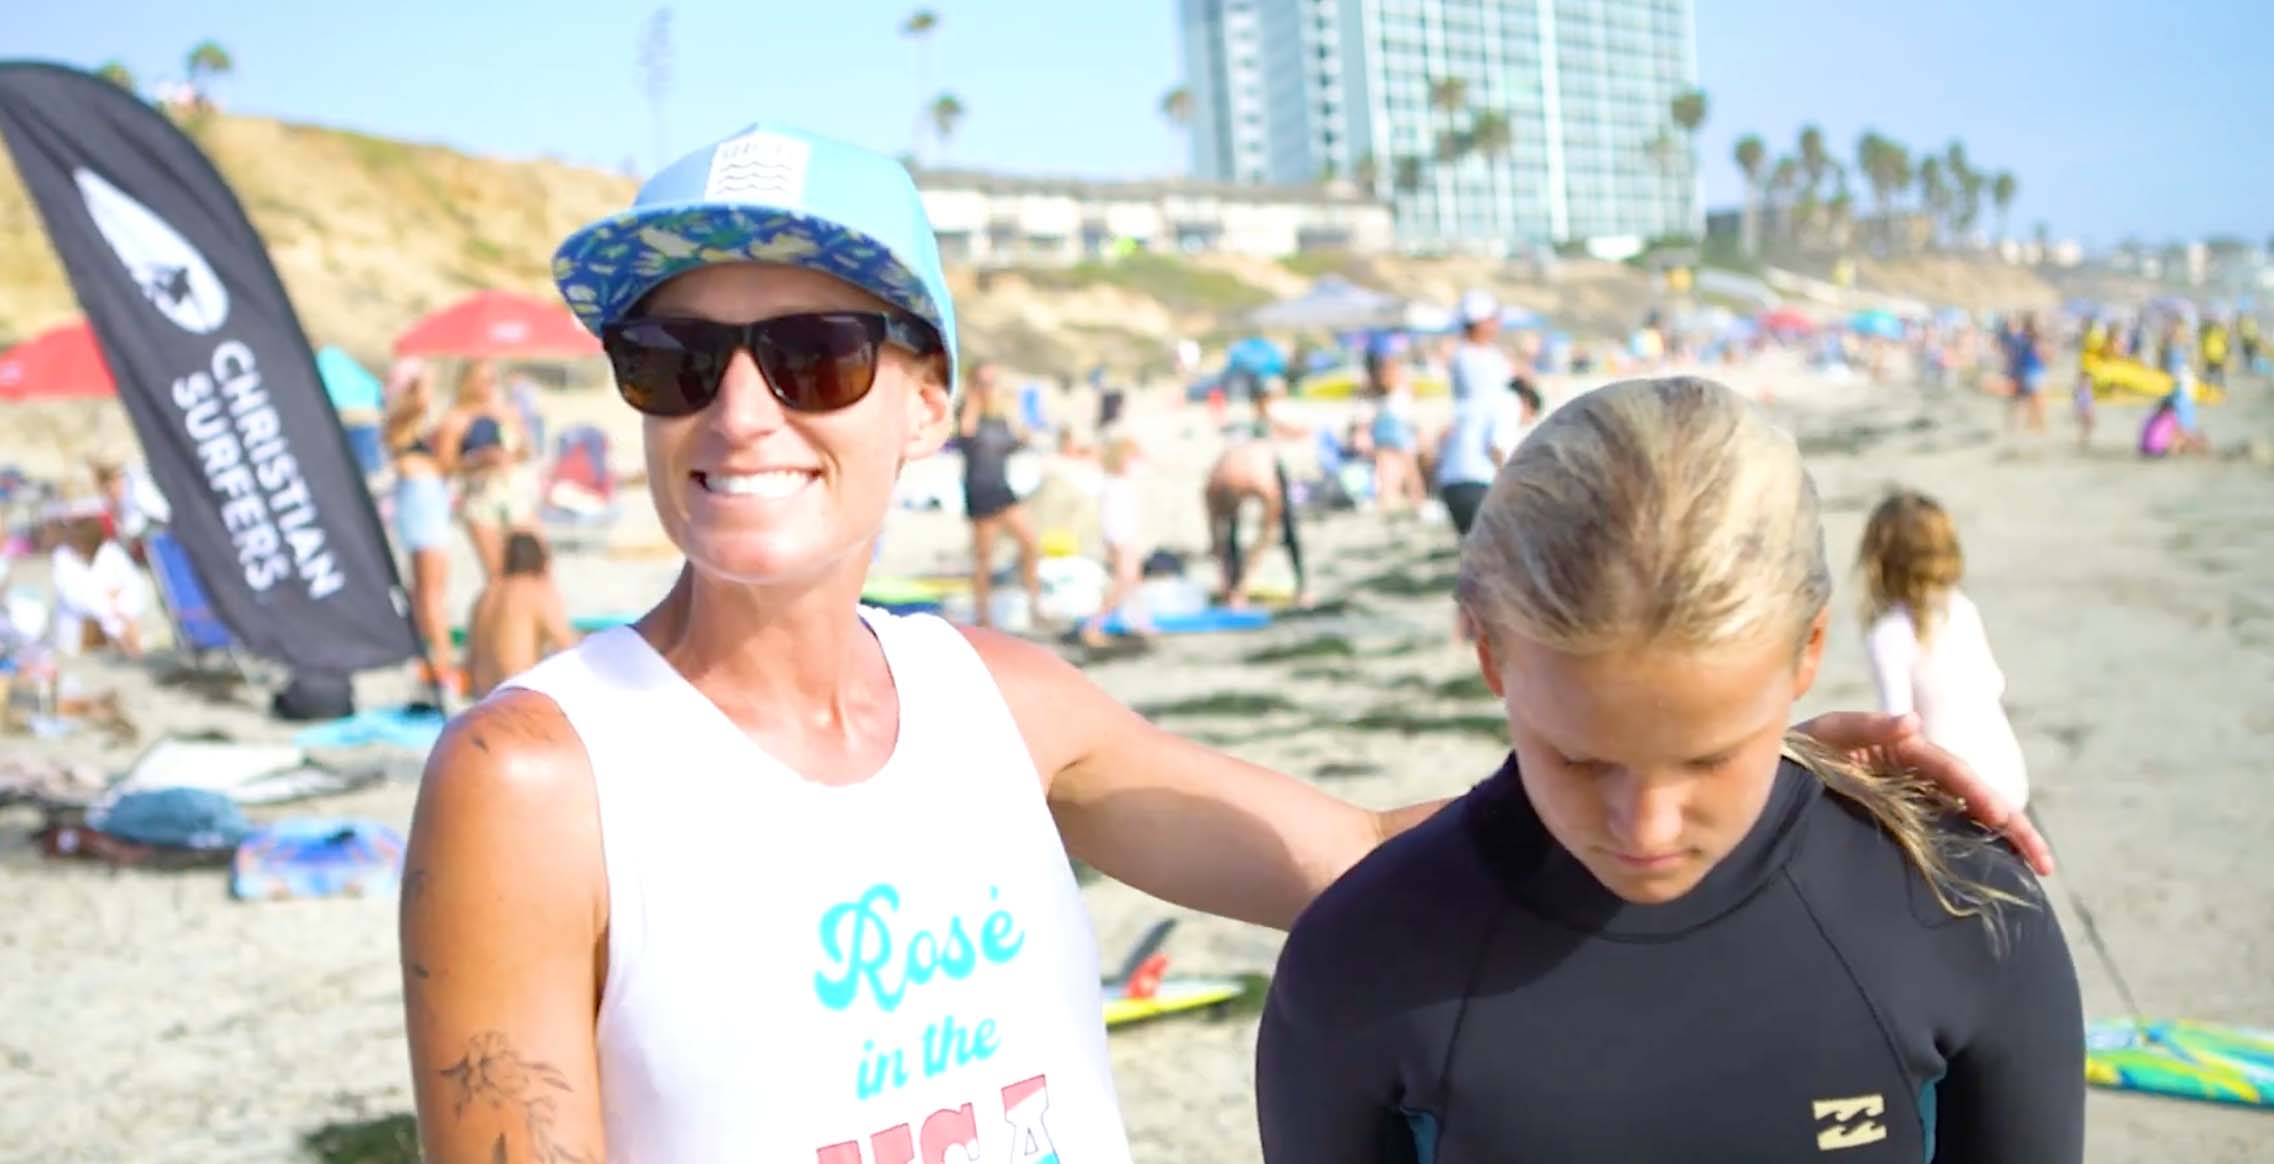 Christina Werner and her three children were especially stoked to participate in the wave-a-thon